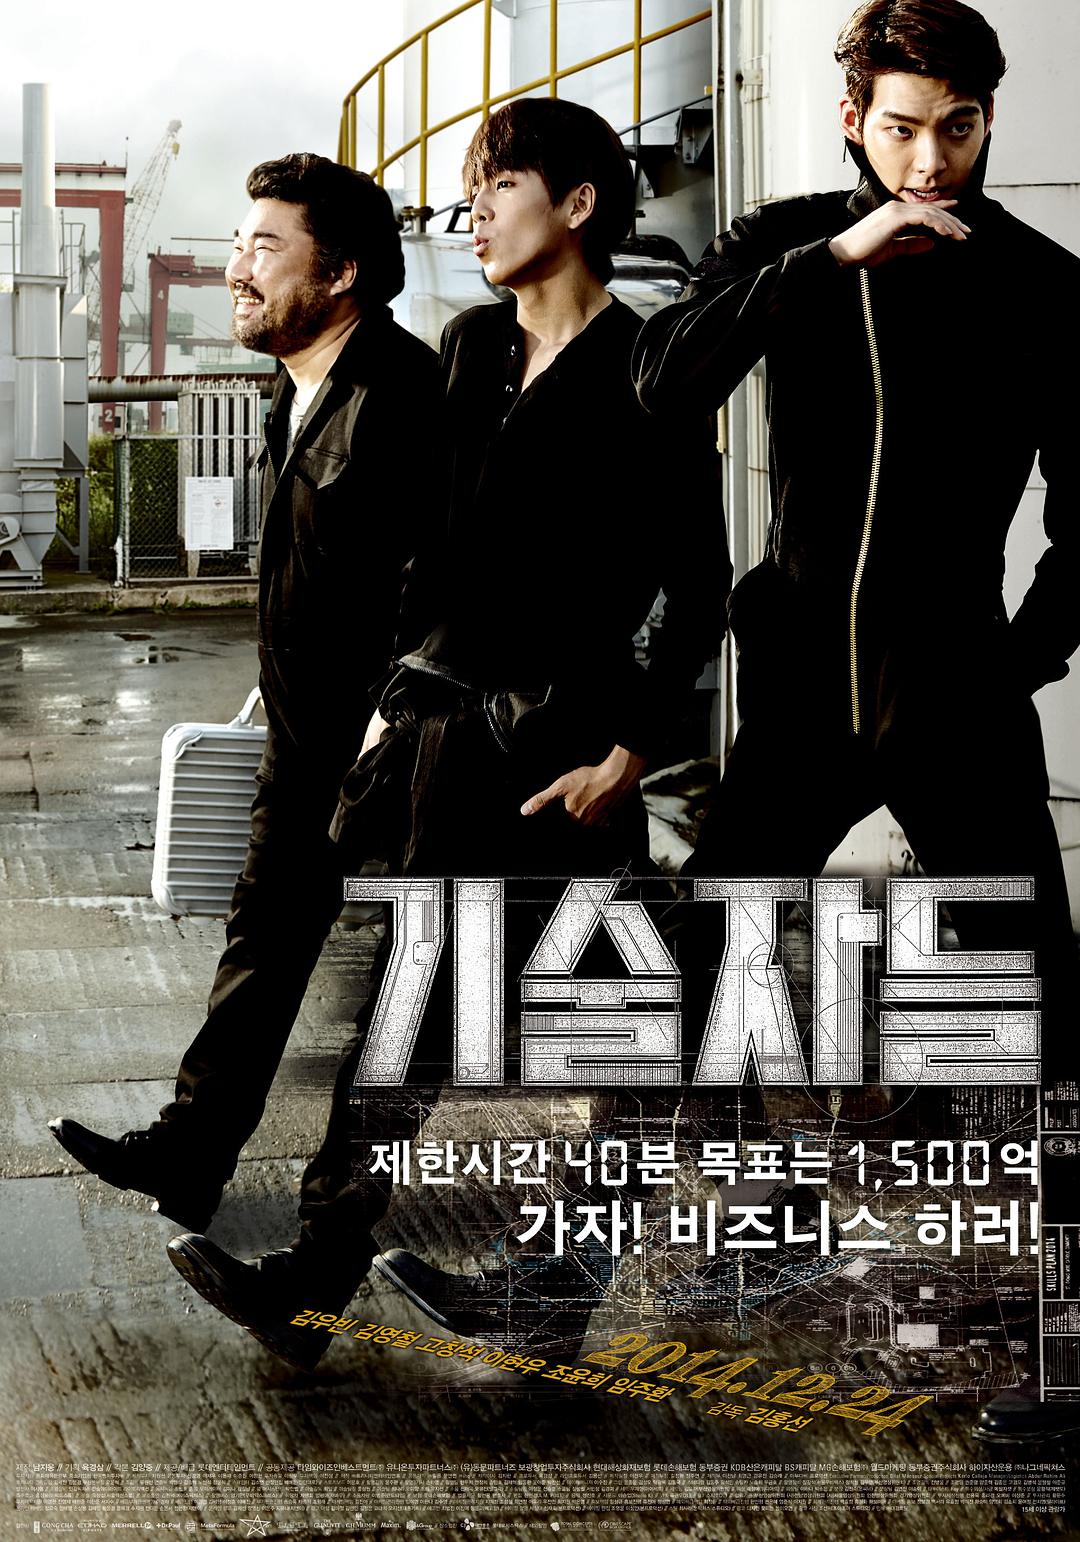  The.Con.Artists.2014.KOREAN.1080p.BluRay.x264.DTS-FGT 10.64GB-1.png